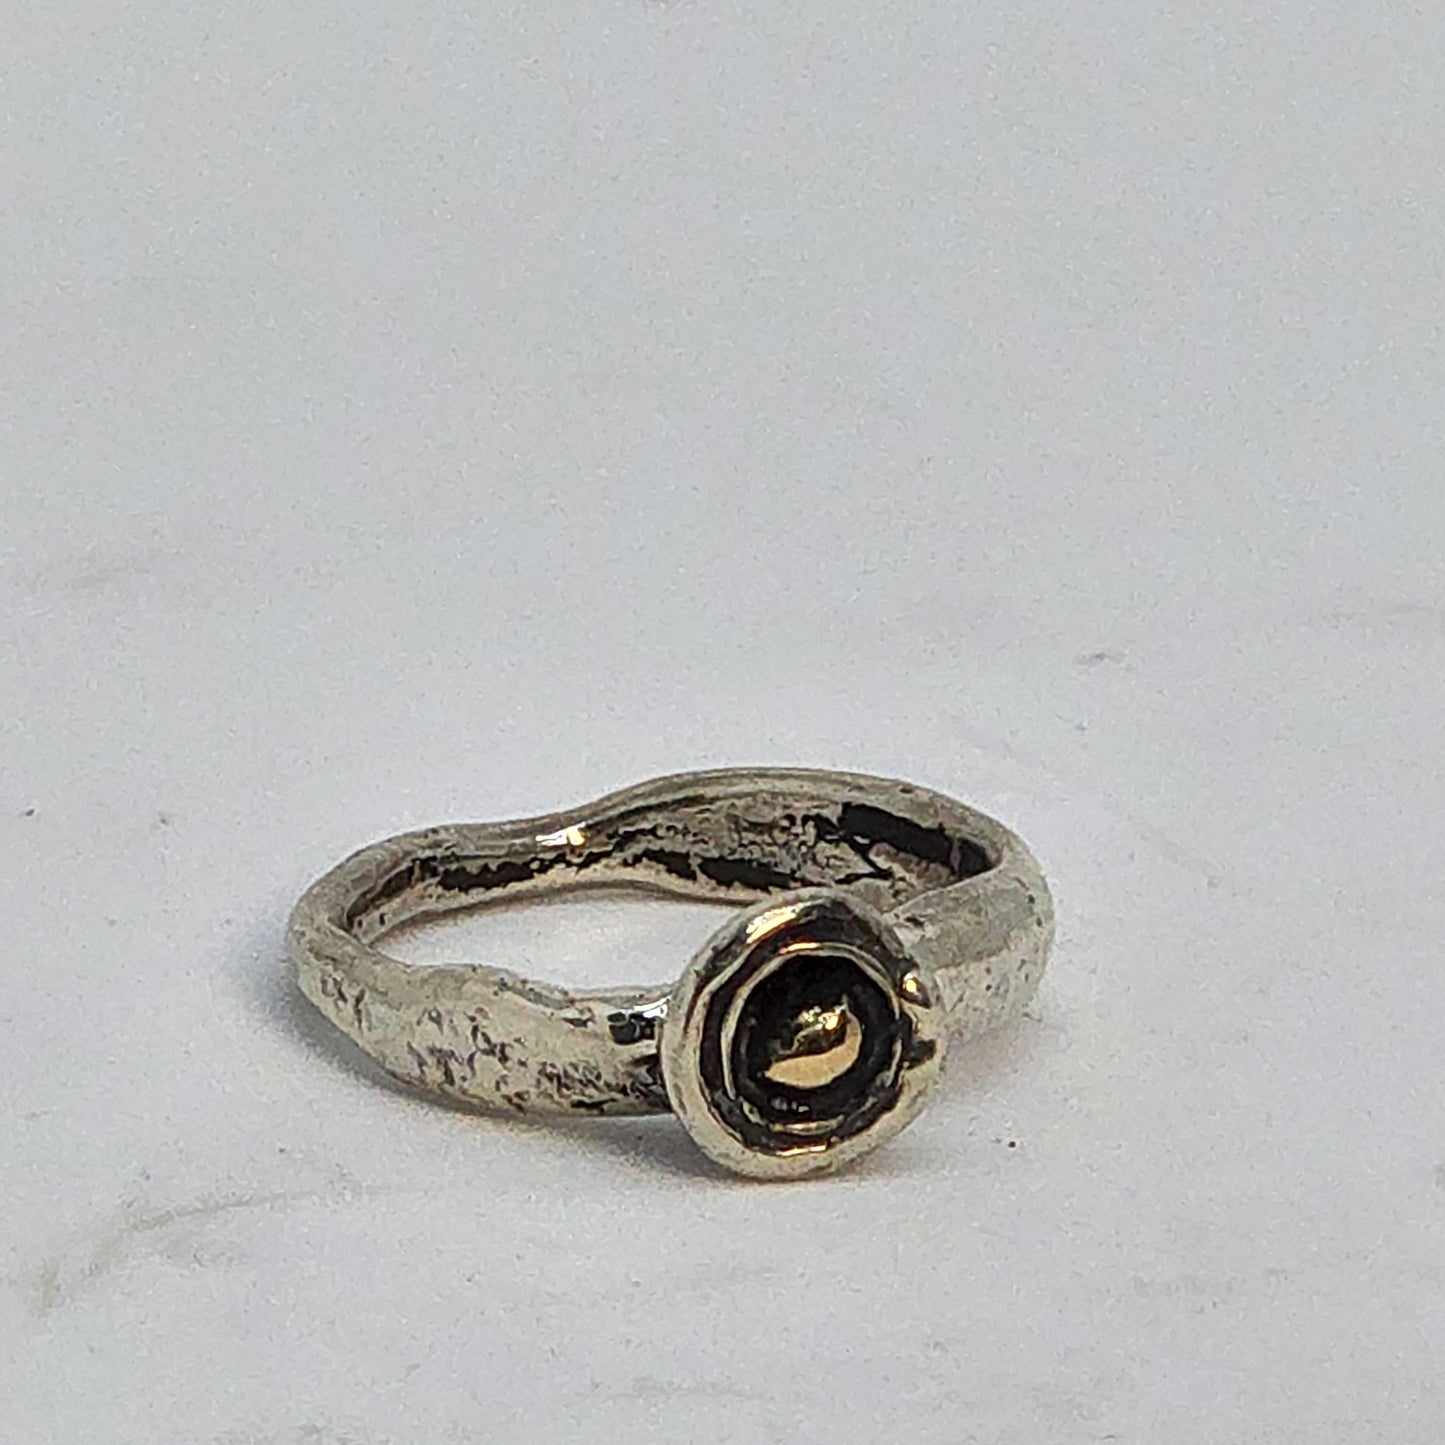 Silver and 9ct gold nest ring